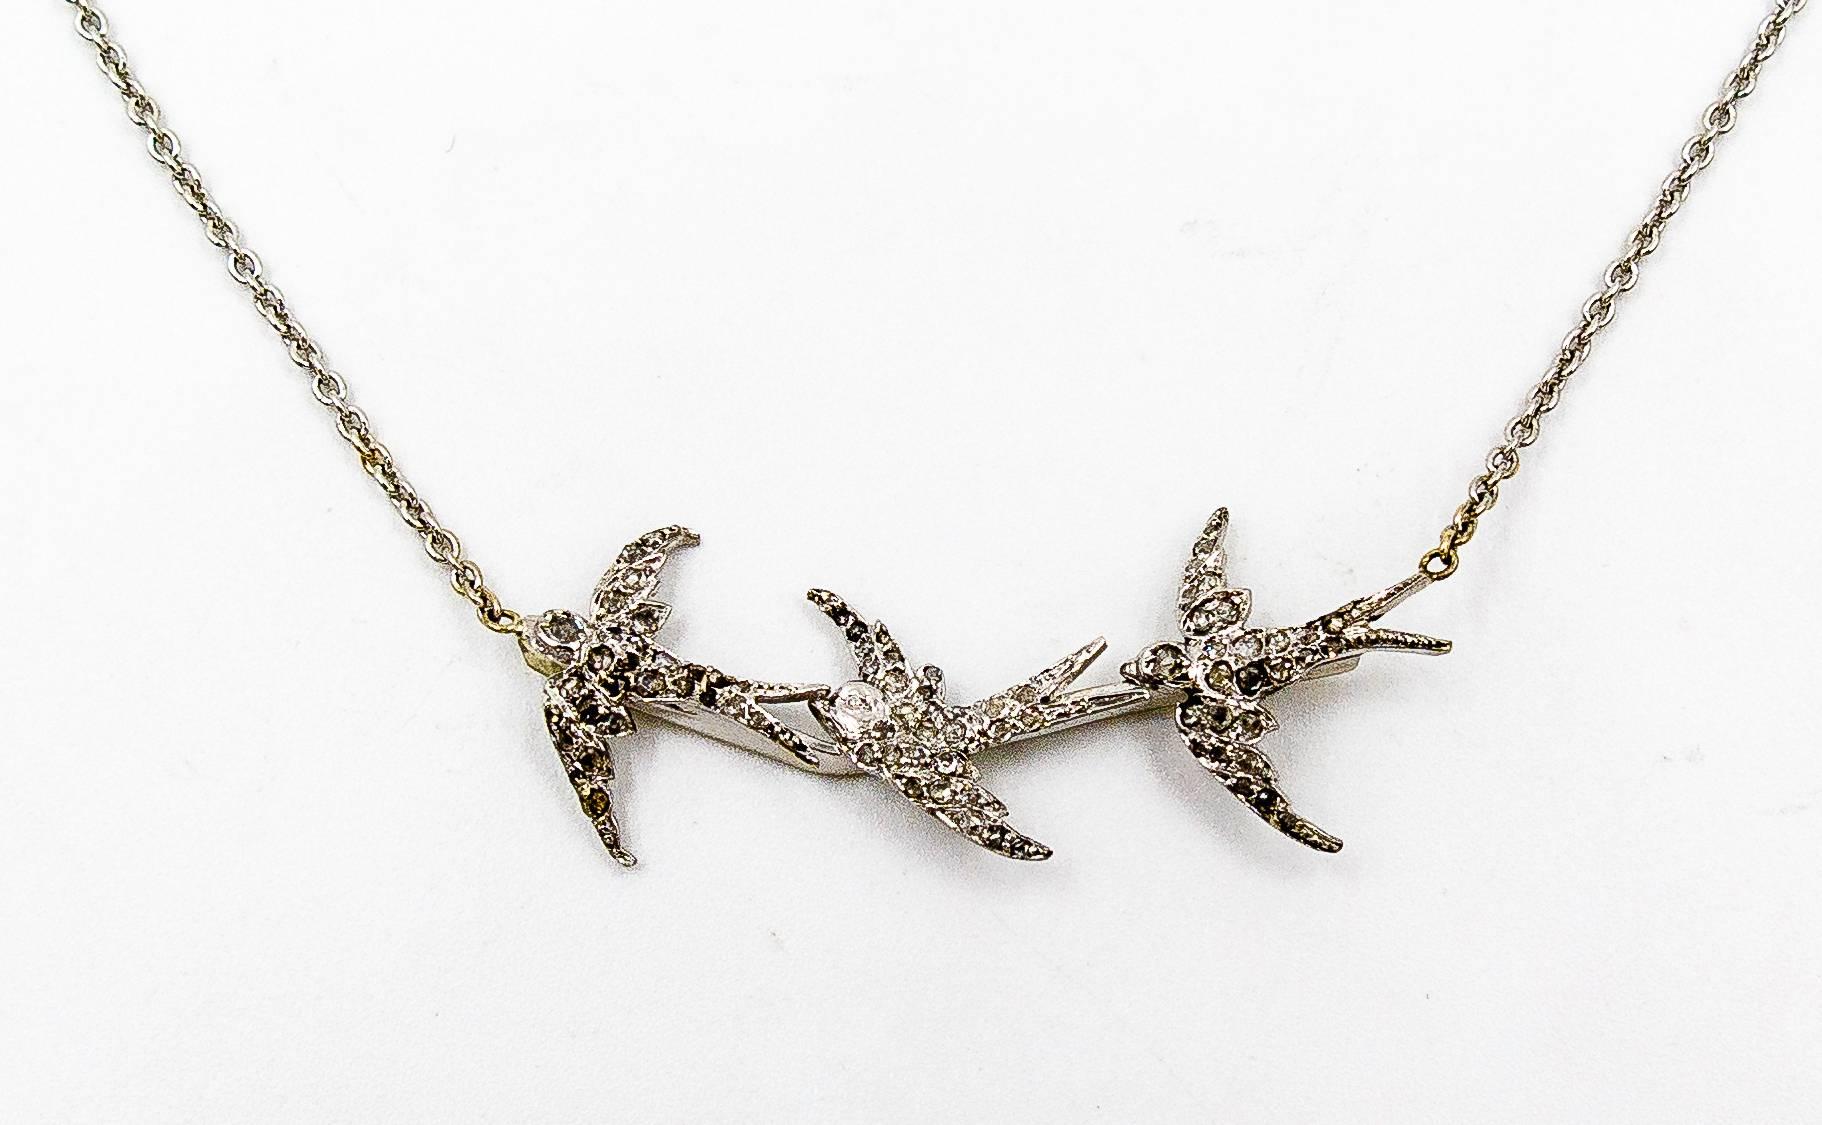    Charmingly unusual and unusually charming, this lovely little necklace is suitable for women of any age.   Three birds, all with outstretched wings, soar across the neck in 14 karat white gold pave set with numerous rose cut diamonds, creating